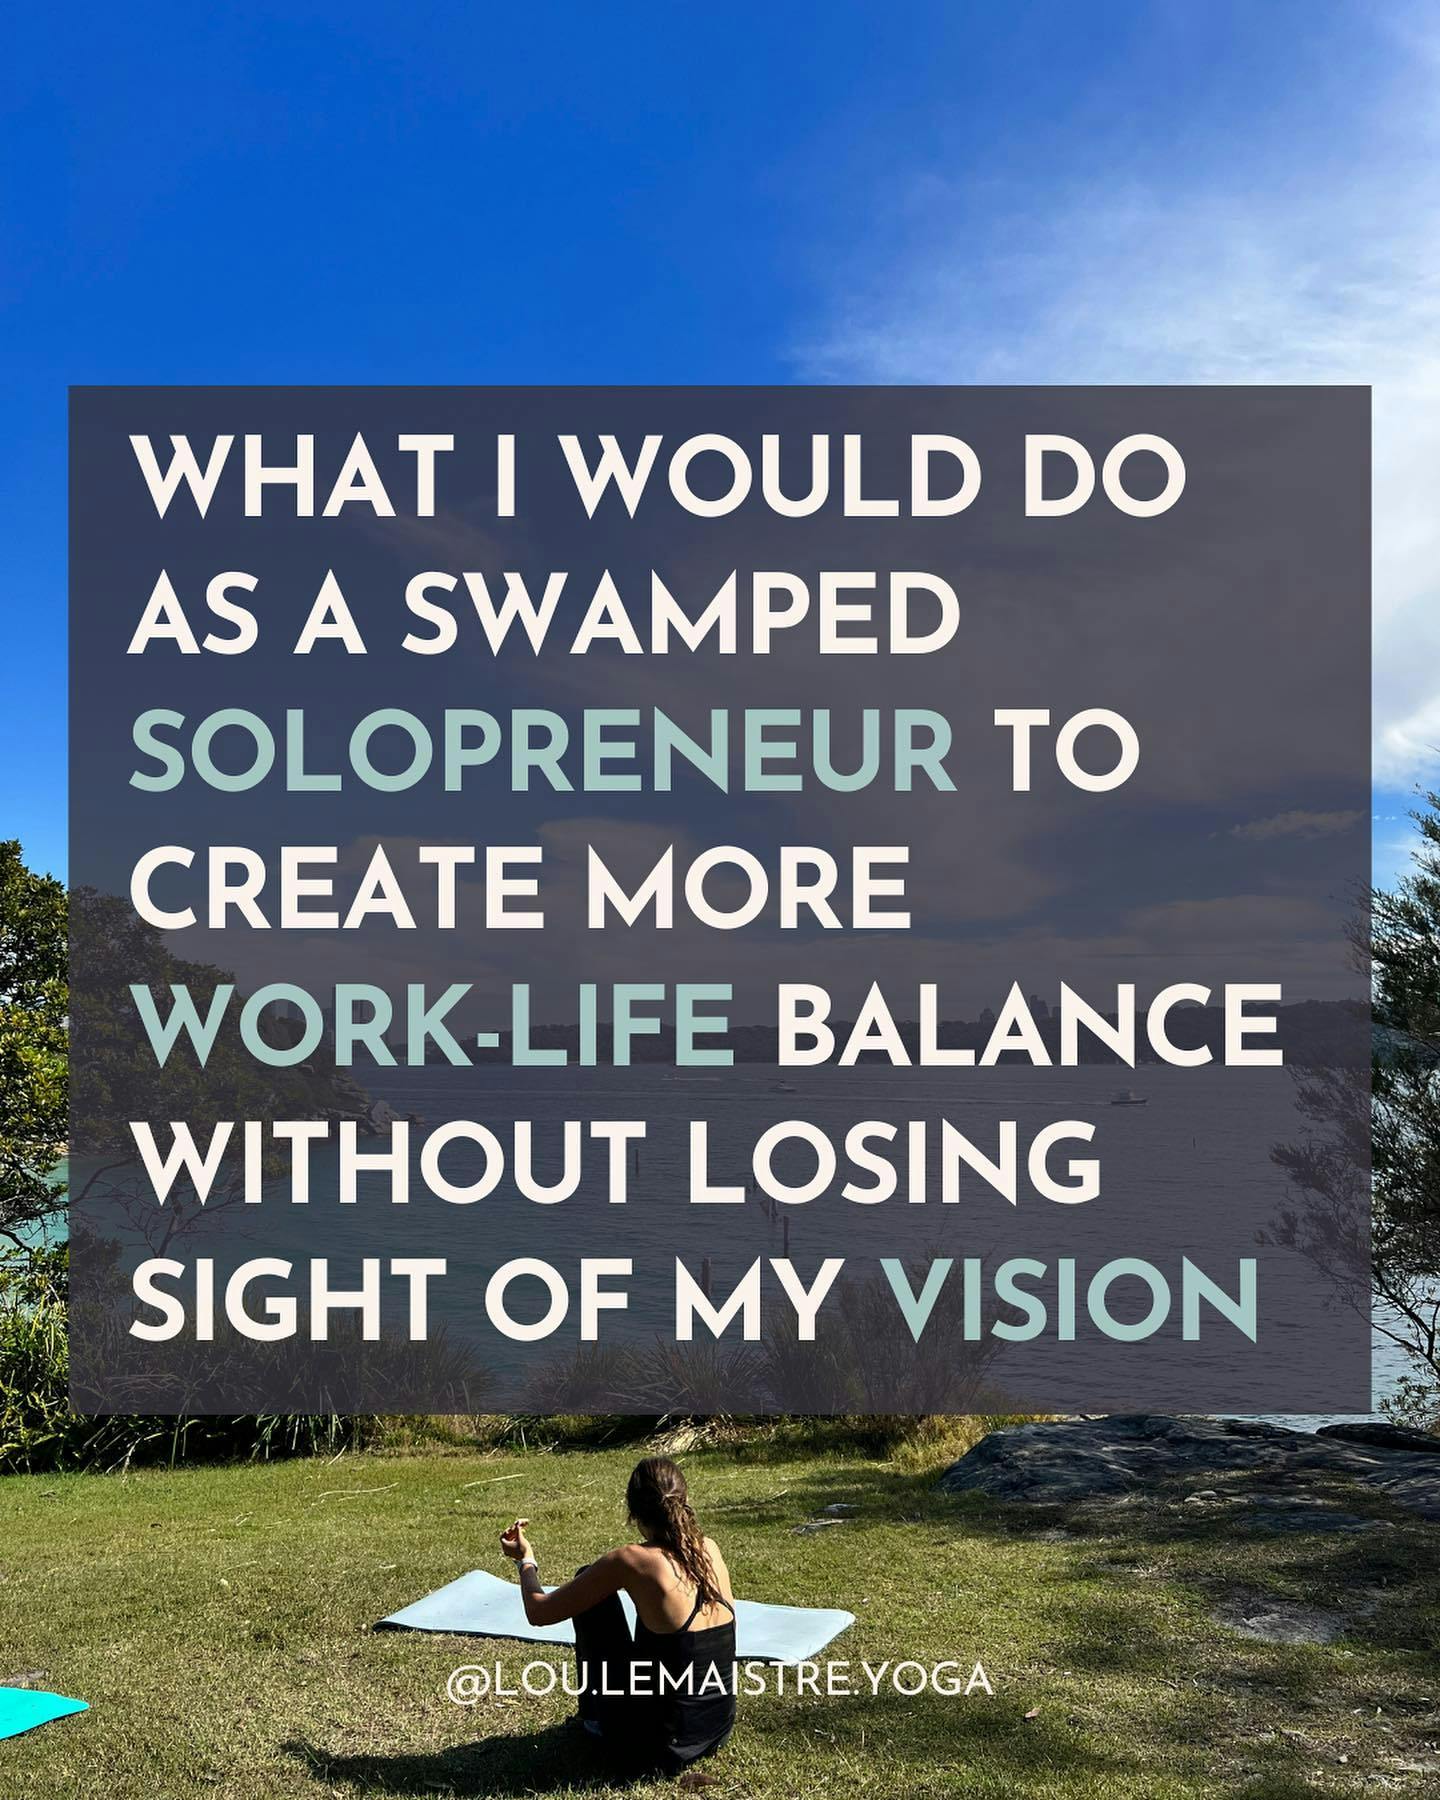 "What I would do as a swamped solopreneur to create more work-life balance without losing sight of my vision" with a landscape in the background of a girl siting on the grass by the sea